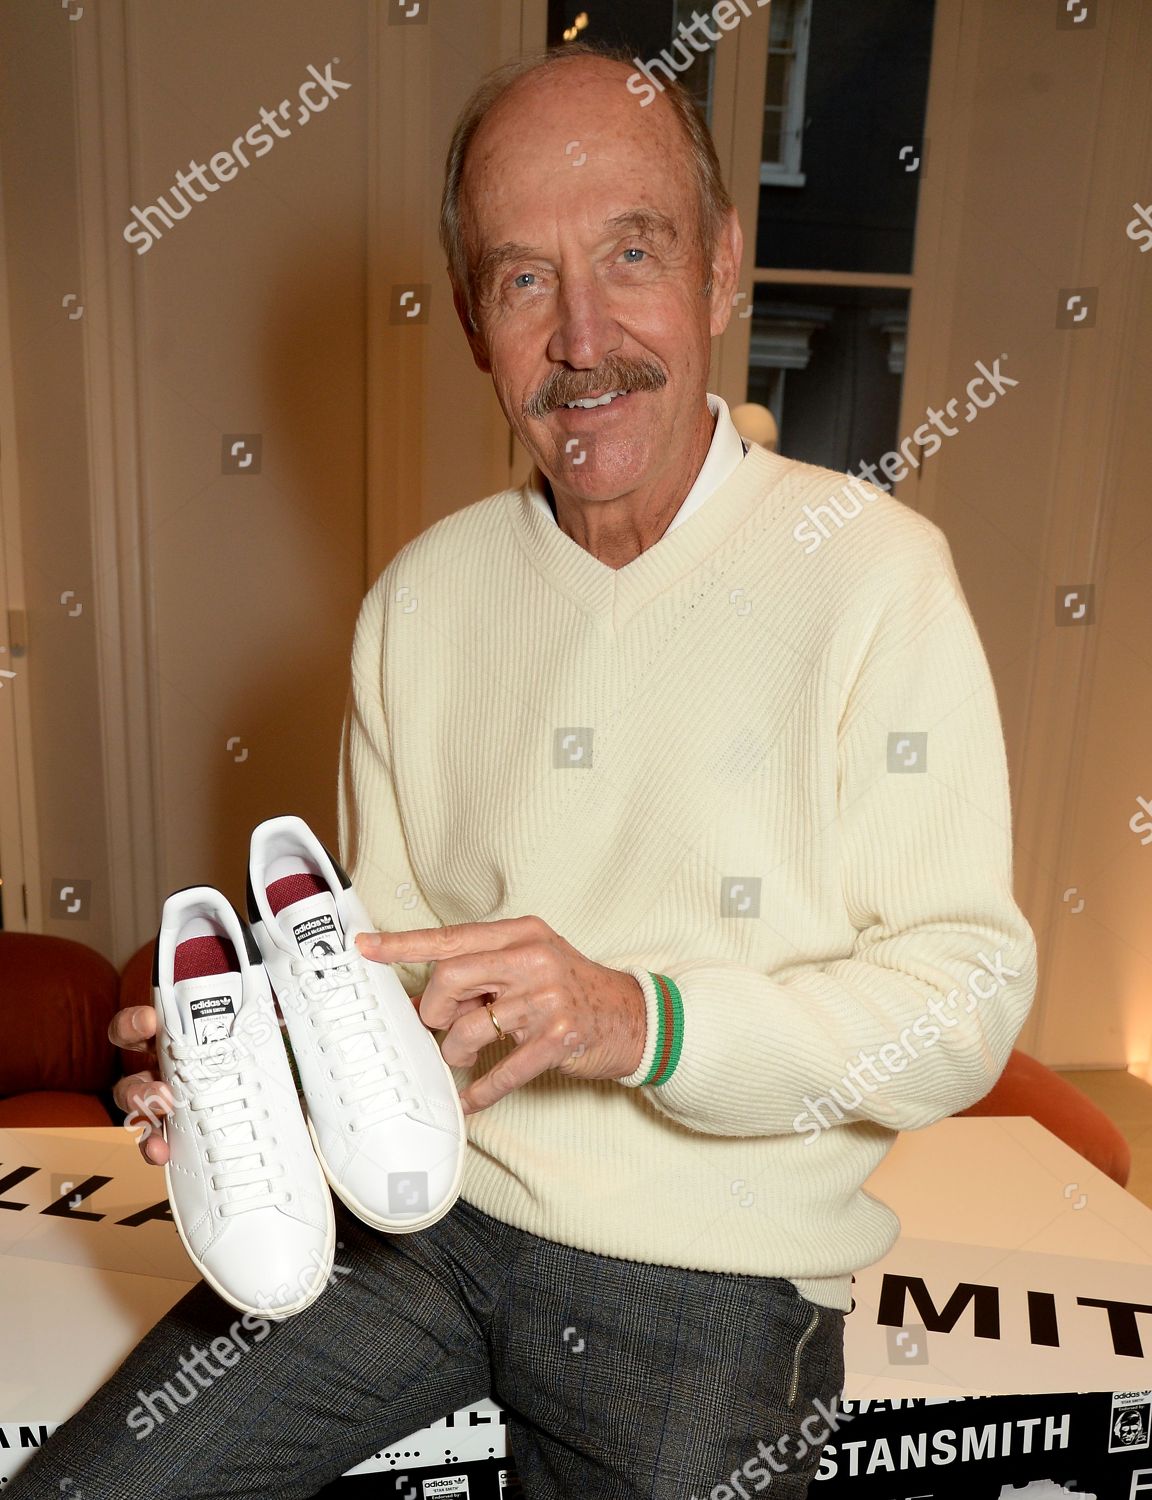 young stan smith